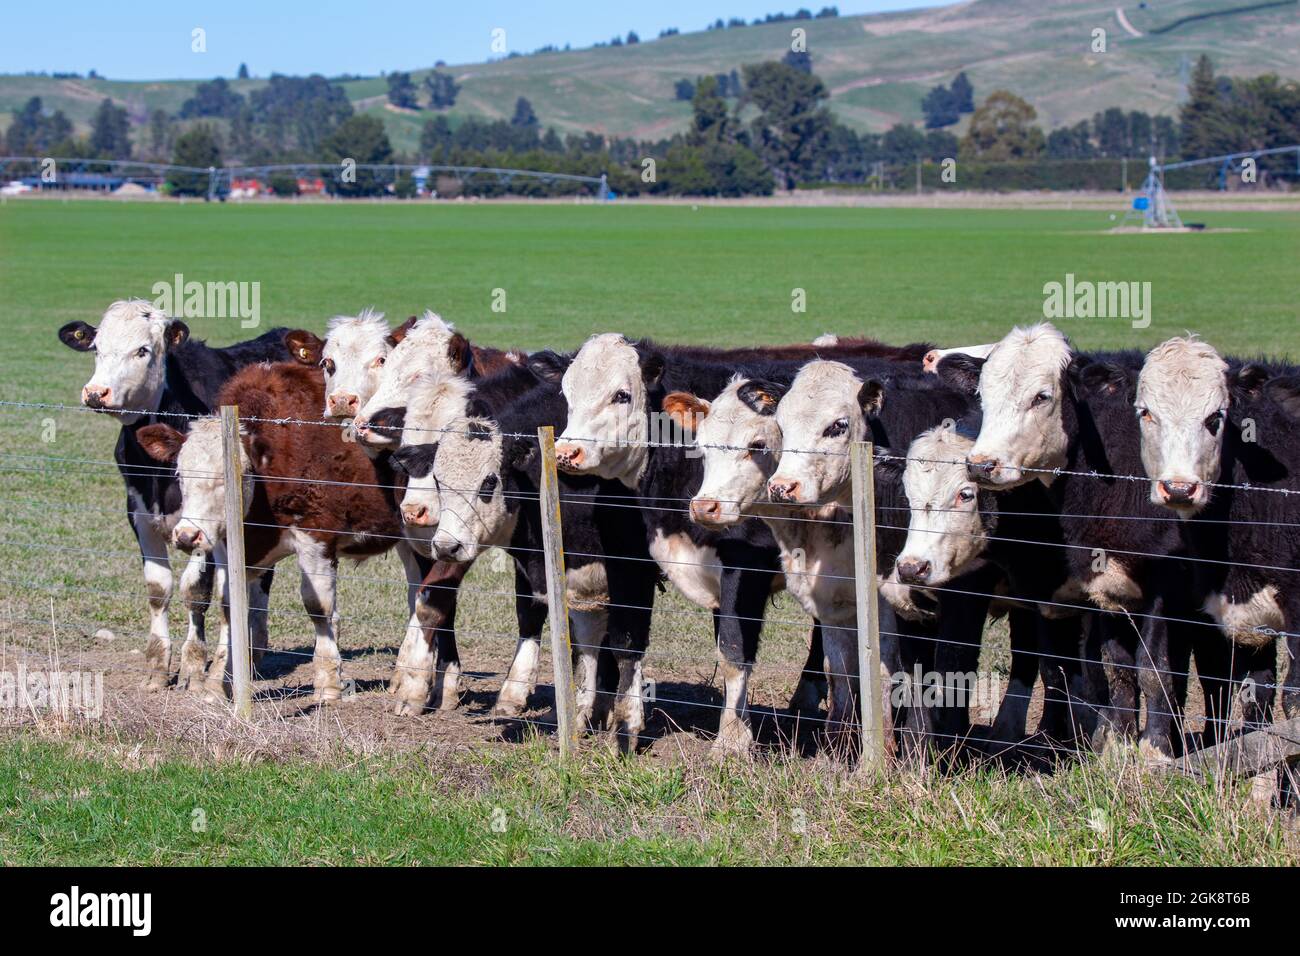 Young beef cattle or steers being raised for the meat industry, Canterbury, New Zealand Stock Photo